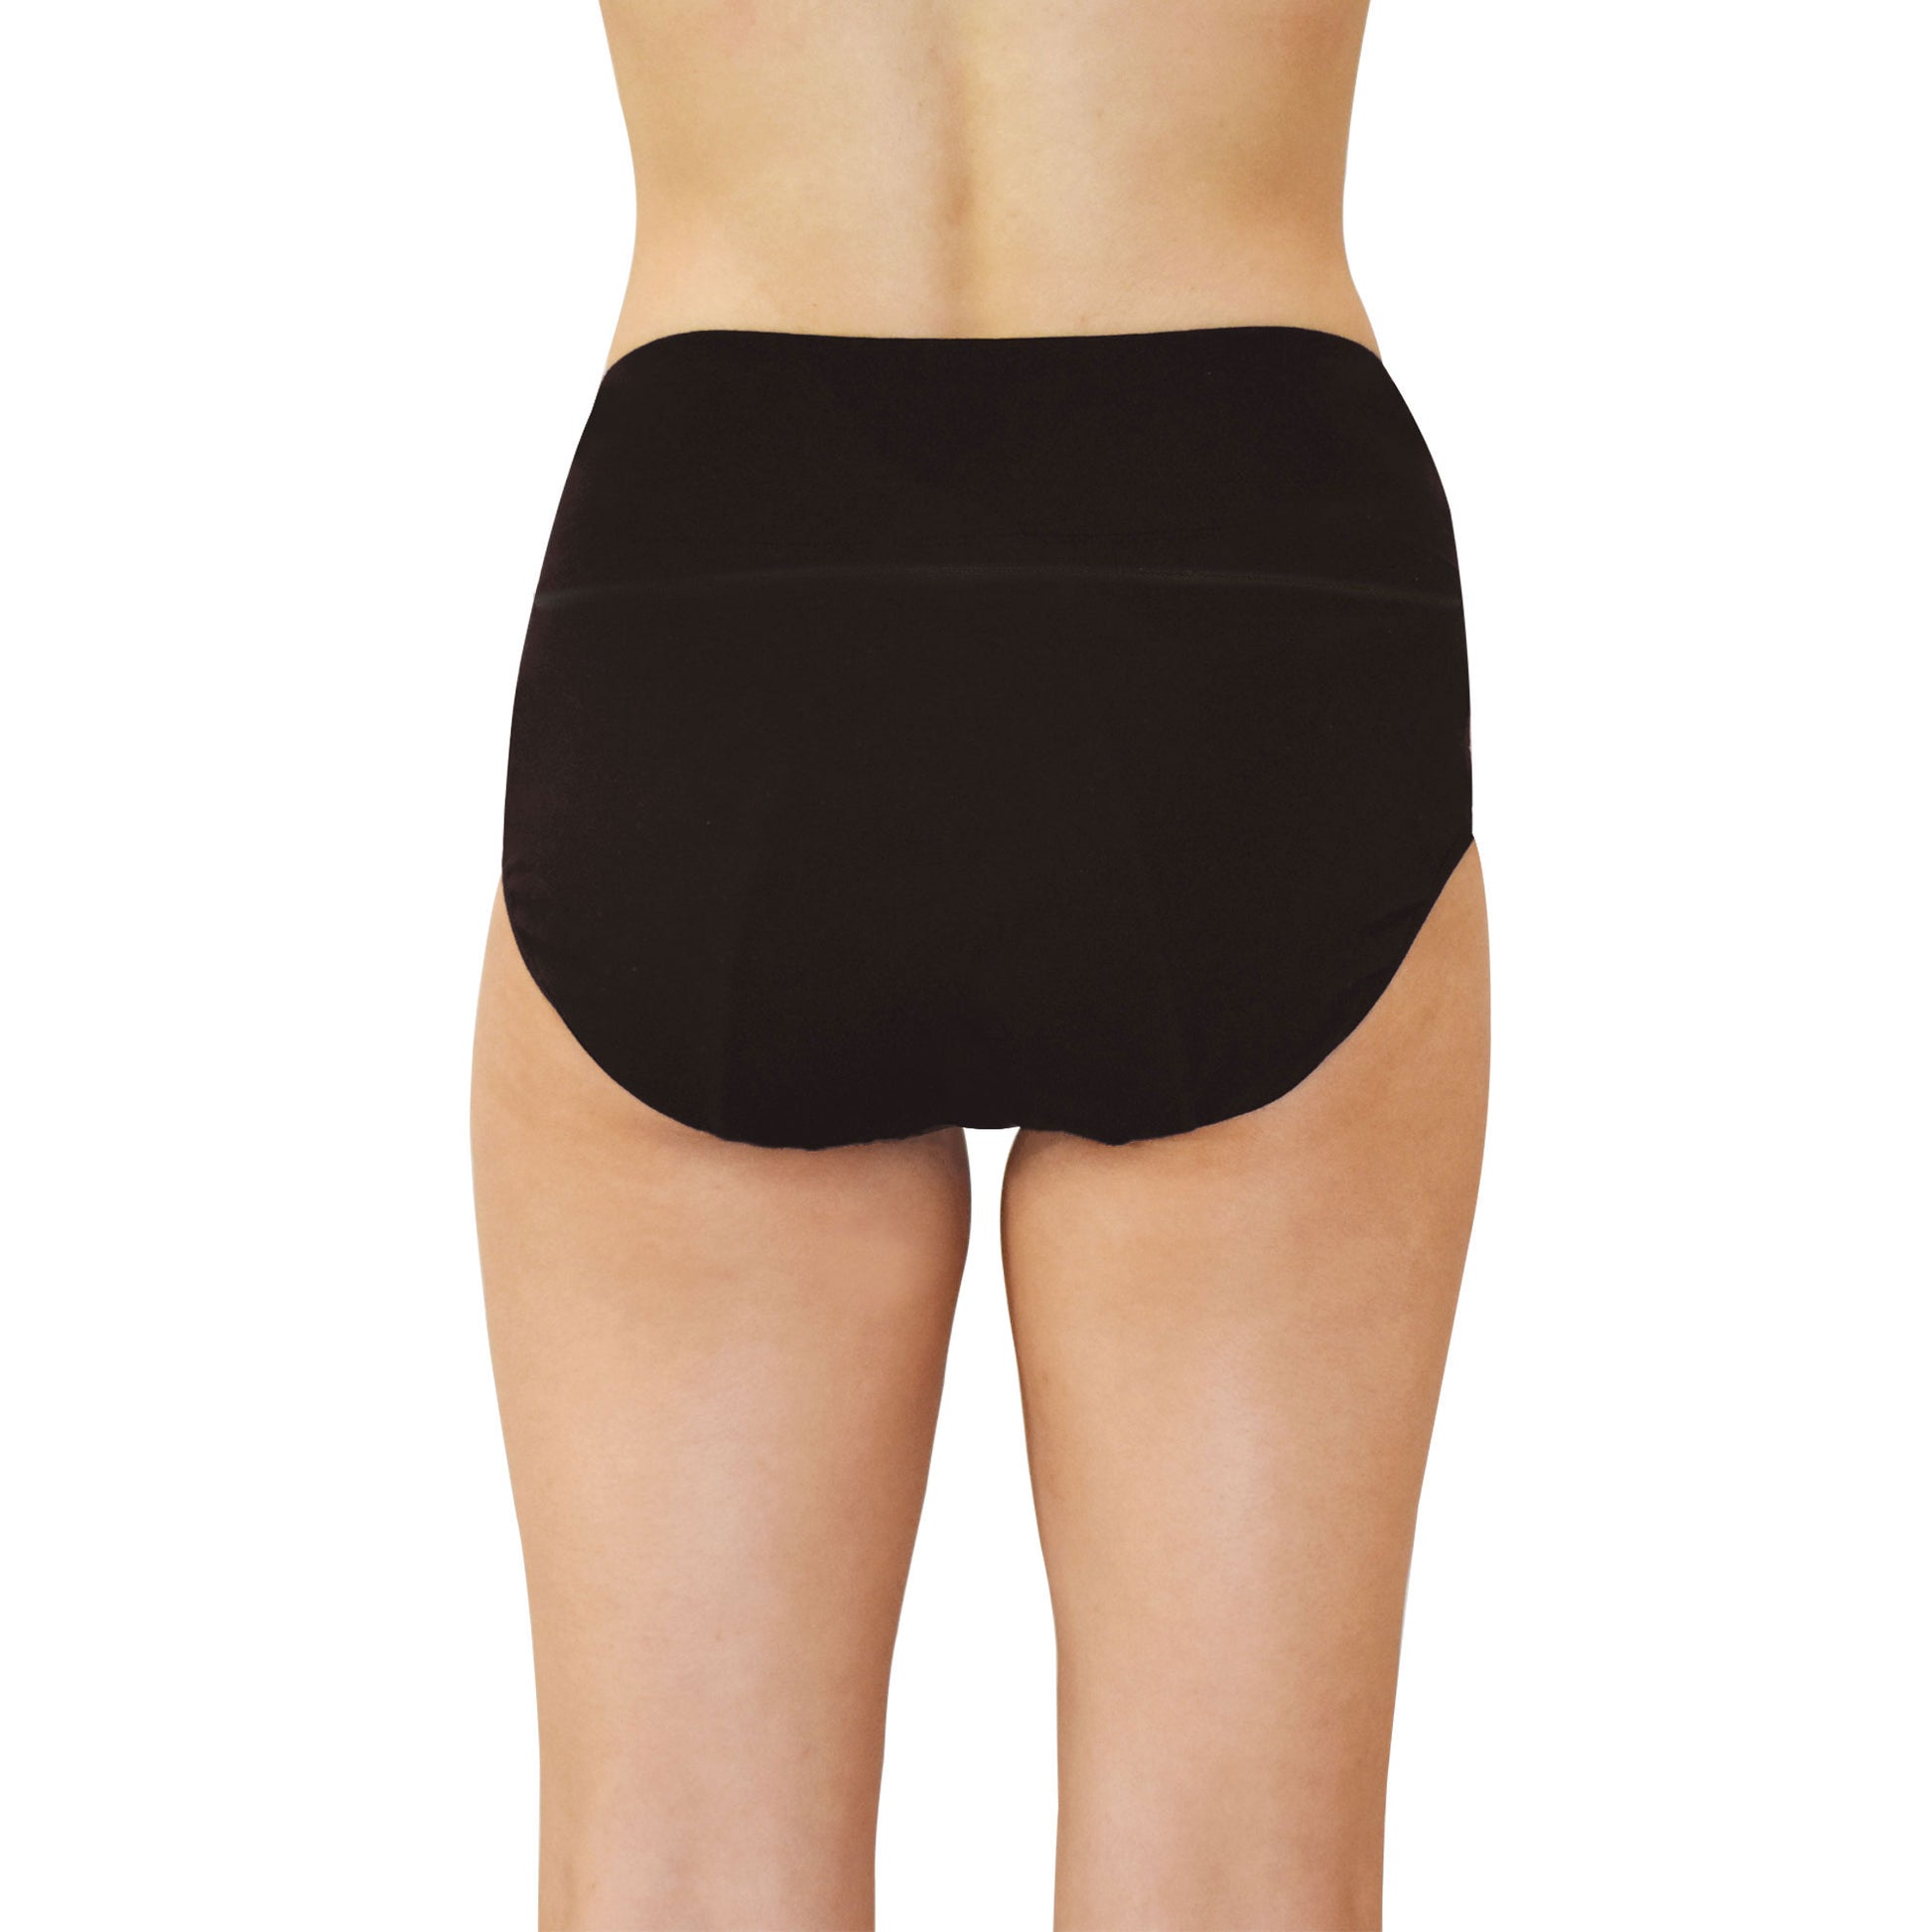 Qnix BacQup Period Underwear - Stain-Resistant, Highly Absorbent